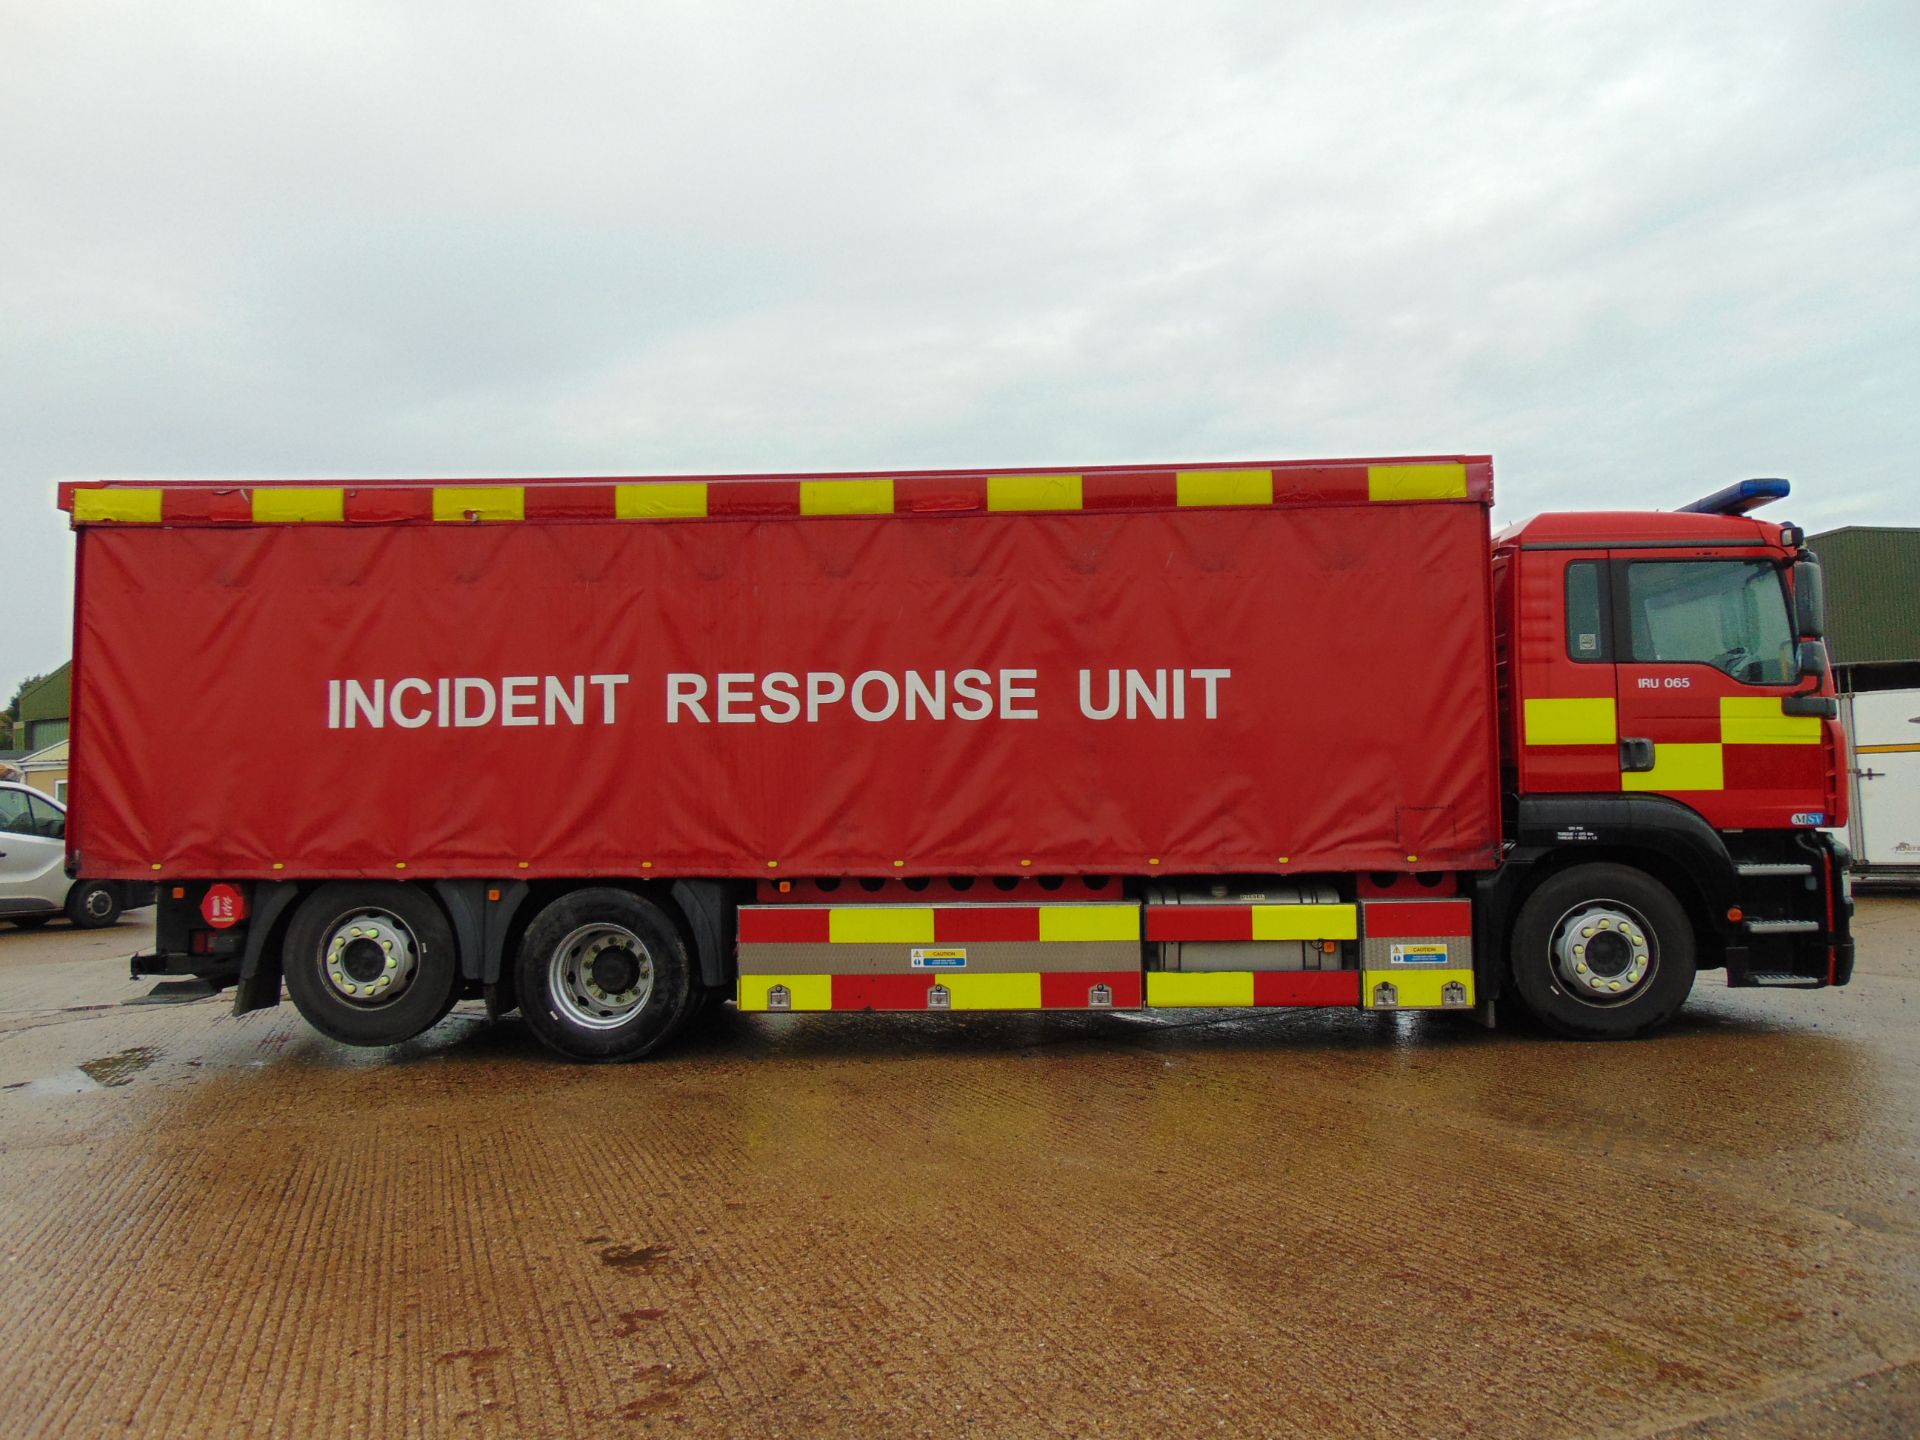 2004 MAN TG-A 6x2 Rear Steer Incident Support Unit - Image 5 of 27